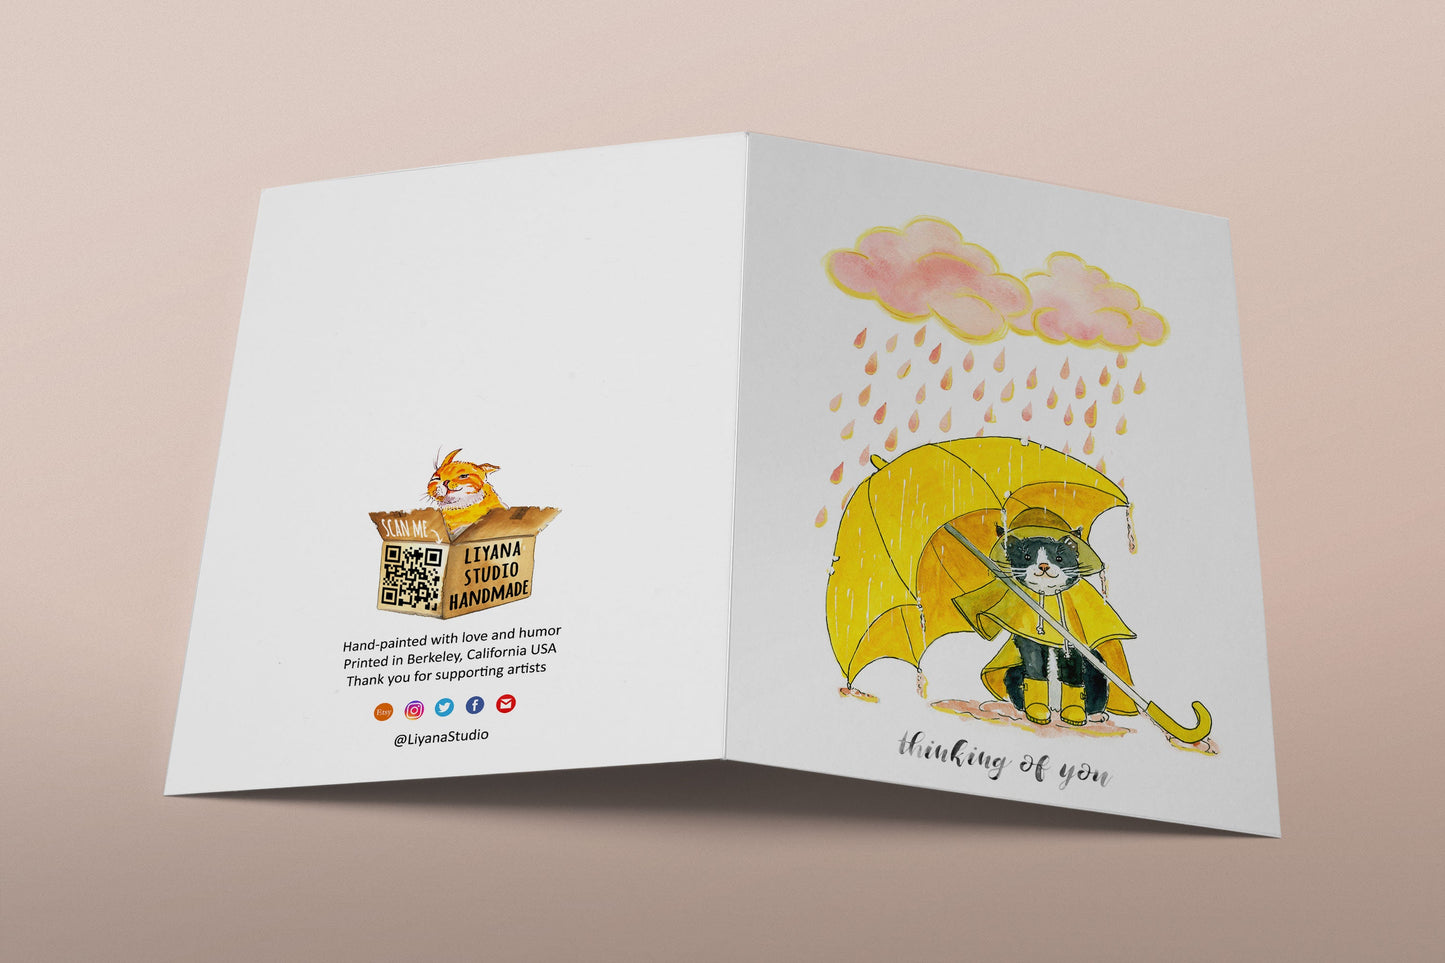 Silver Lining Cat Thinking Of You Card For Best Friends - Sympathy Card From Black And White Tuxedo Cat - Rainy Day Cloud